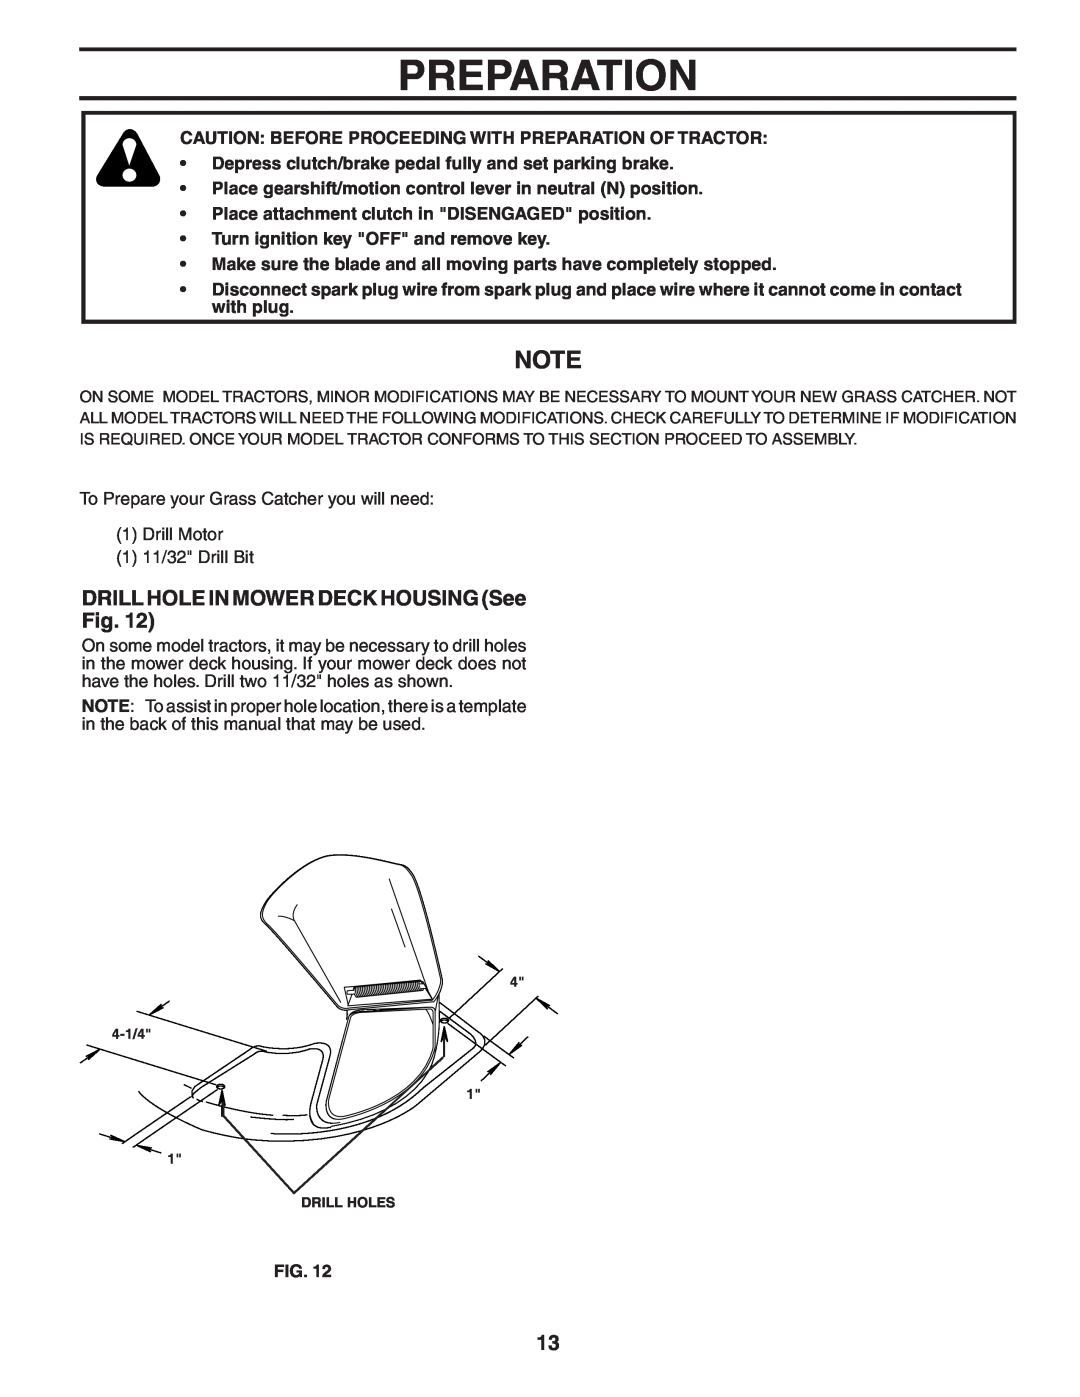 Poulan 532140600, C36C, 954 04 05-06 owner manual Preparation, DRILL HOLE IN MOWER DECK HOUSING See 